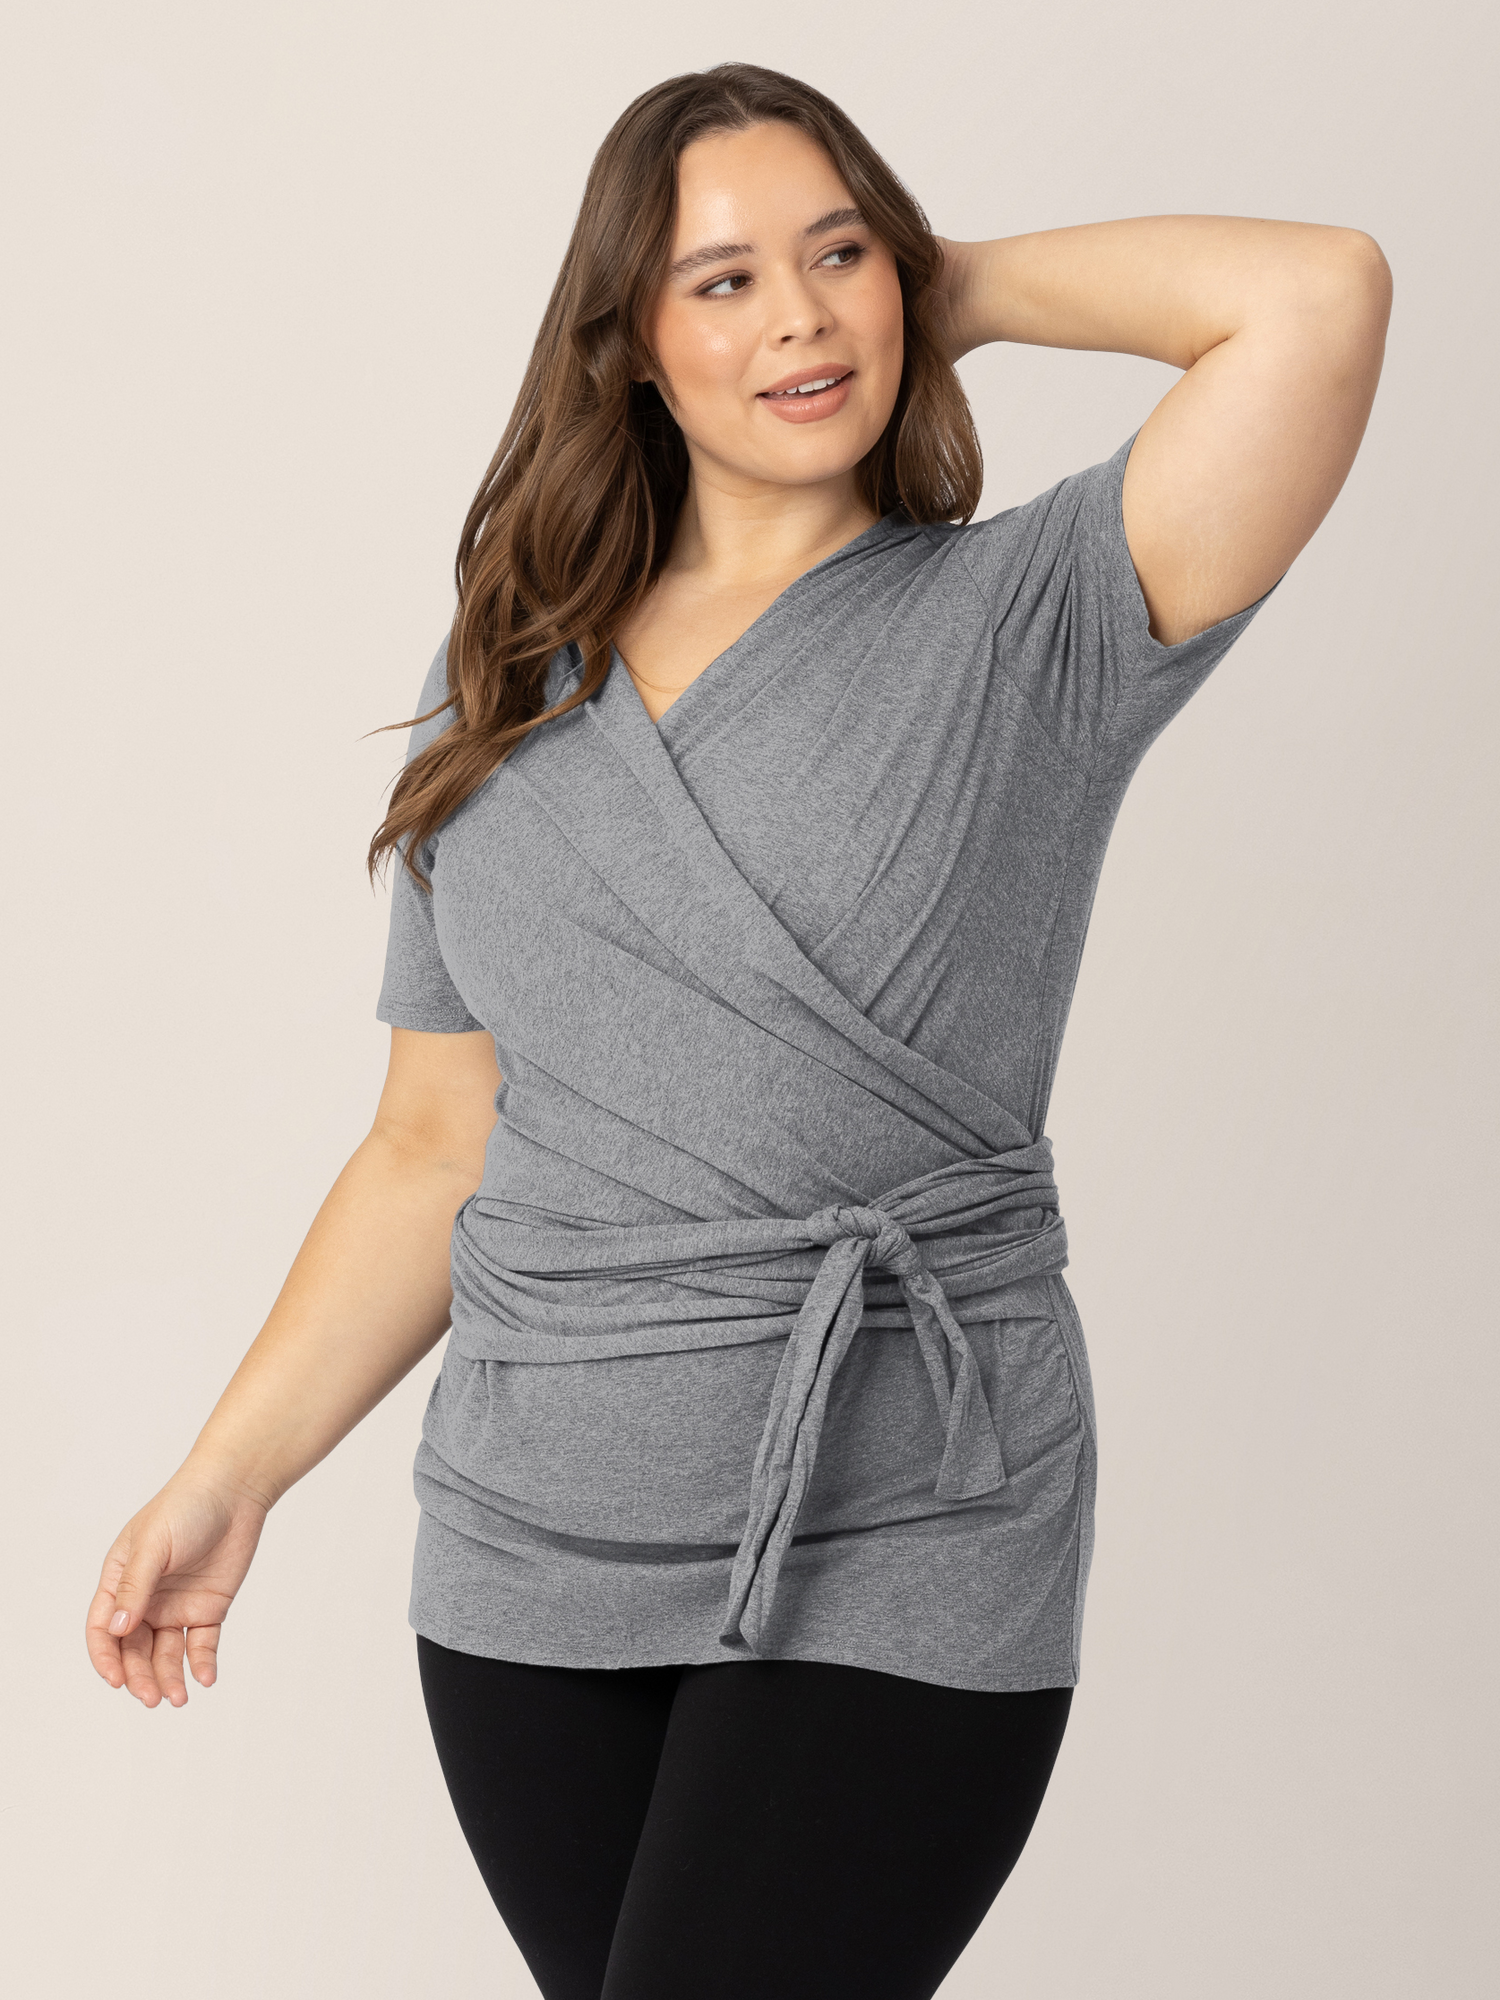 Model wearing the Organic Cotton Skin to Skin Wrap Top in Charcoal Grey Heather with her hand on the back of her head. 